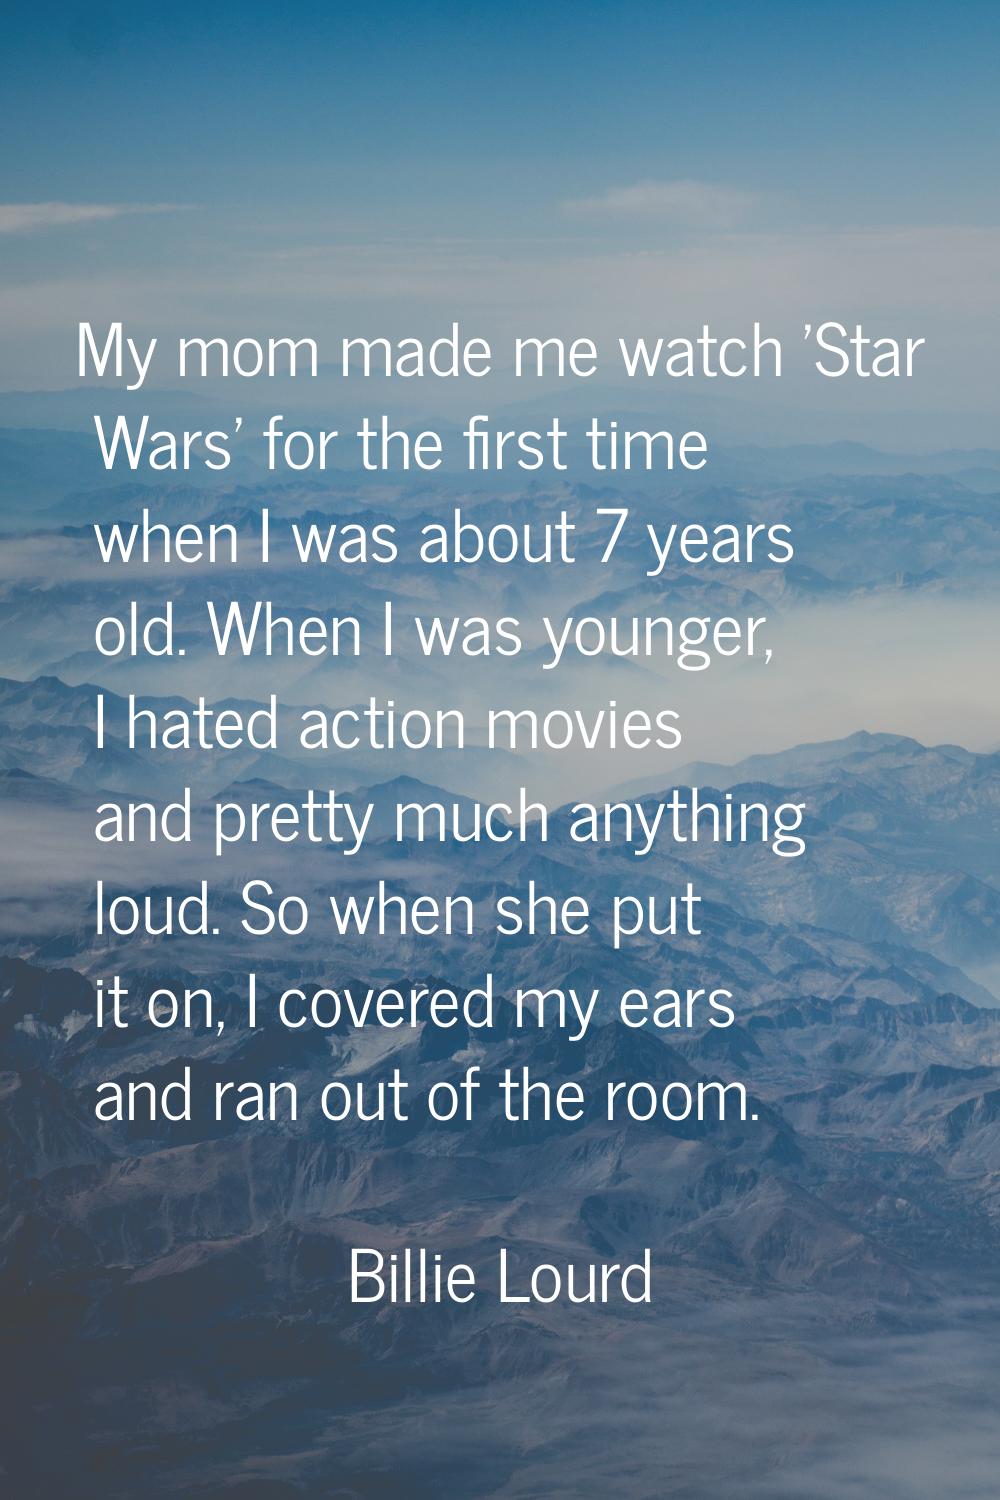 My mom made me watch 'Star Wars' for the first time when I was about 7 years old. When I was younge